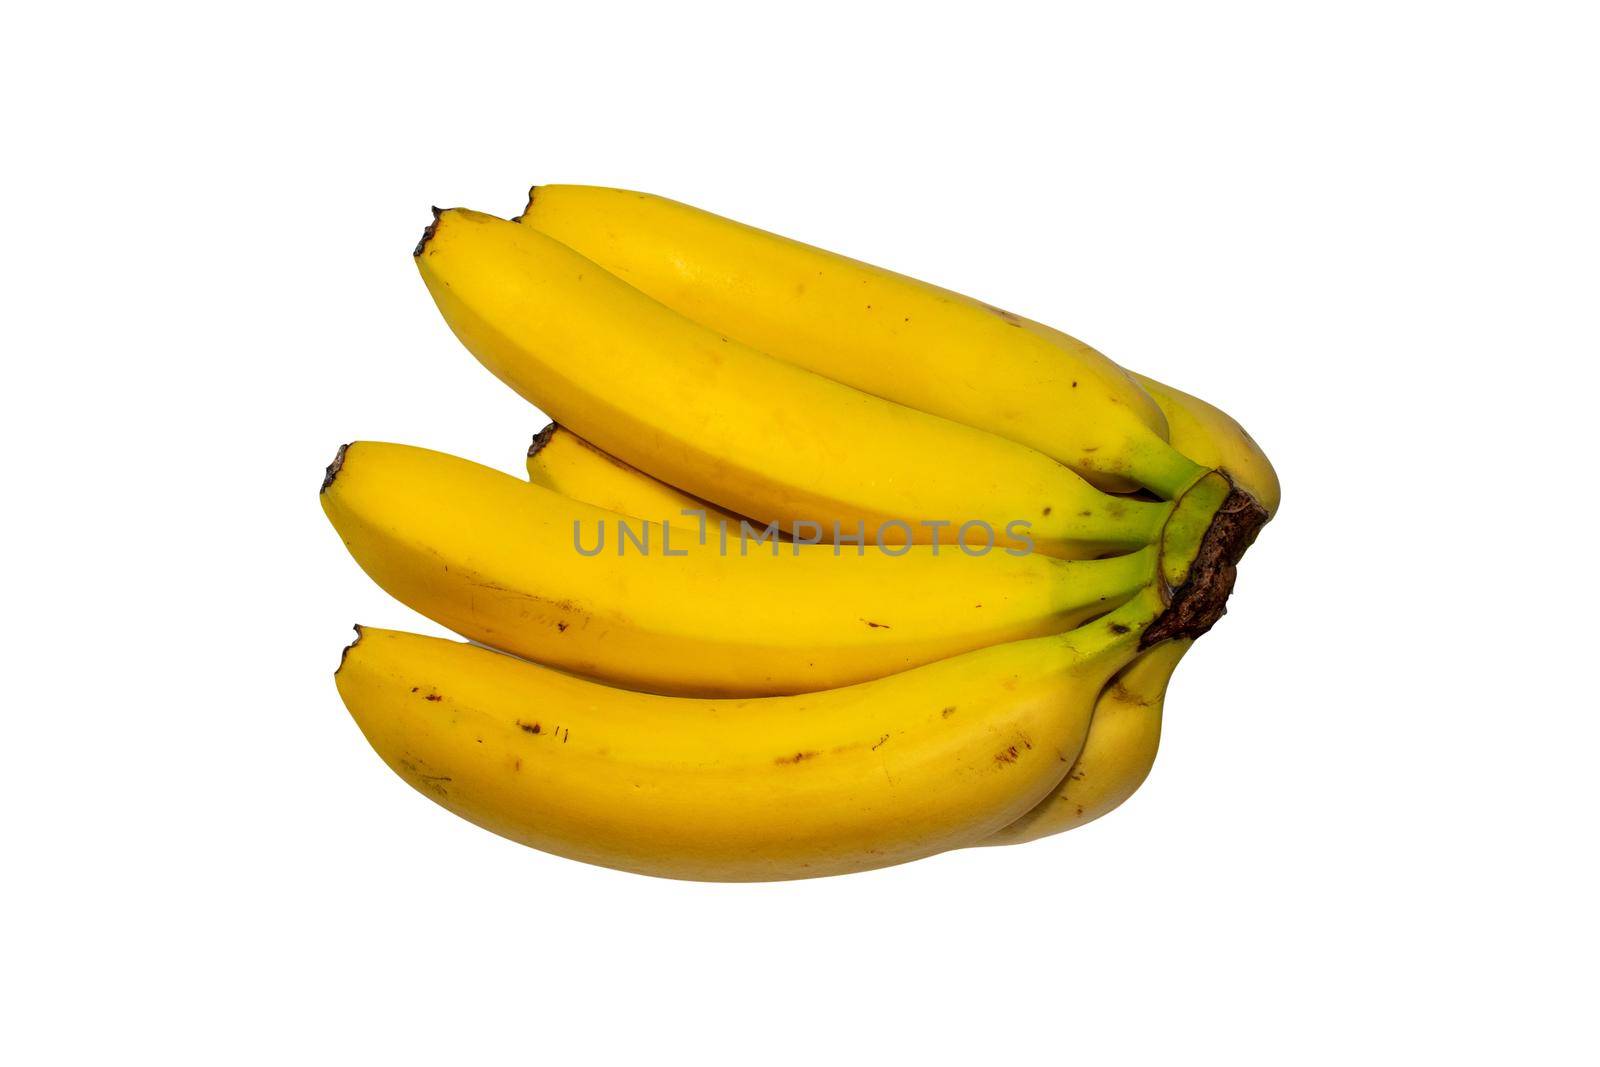 A bunch of ripe bananas on a white background by bybyphotography